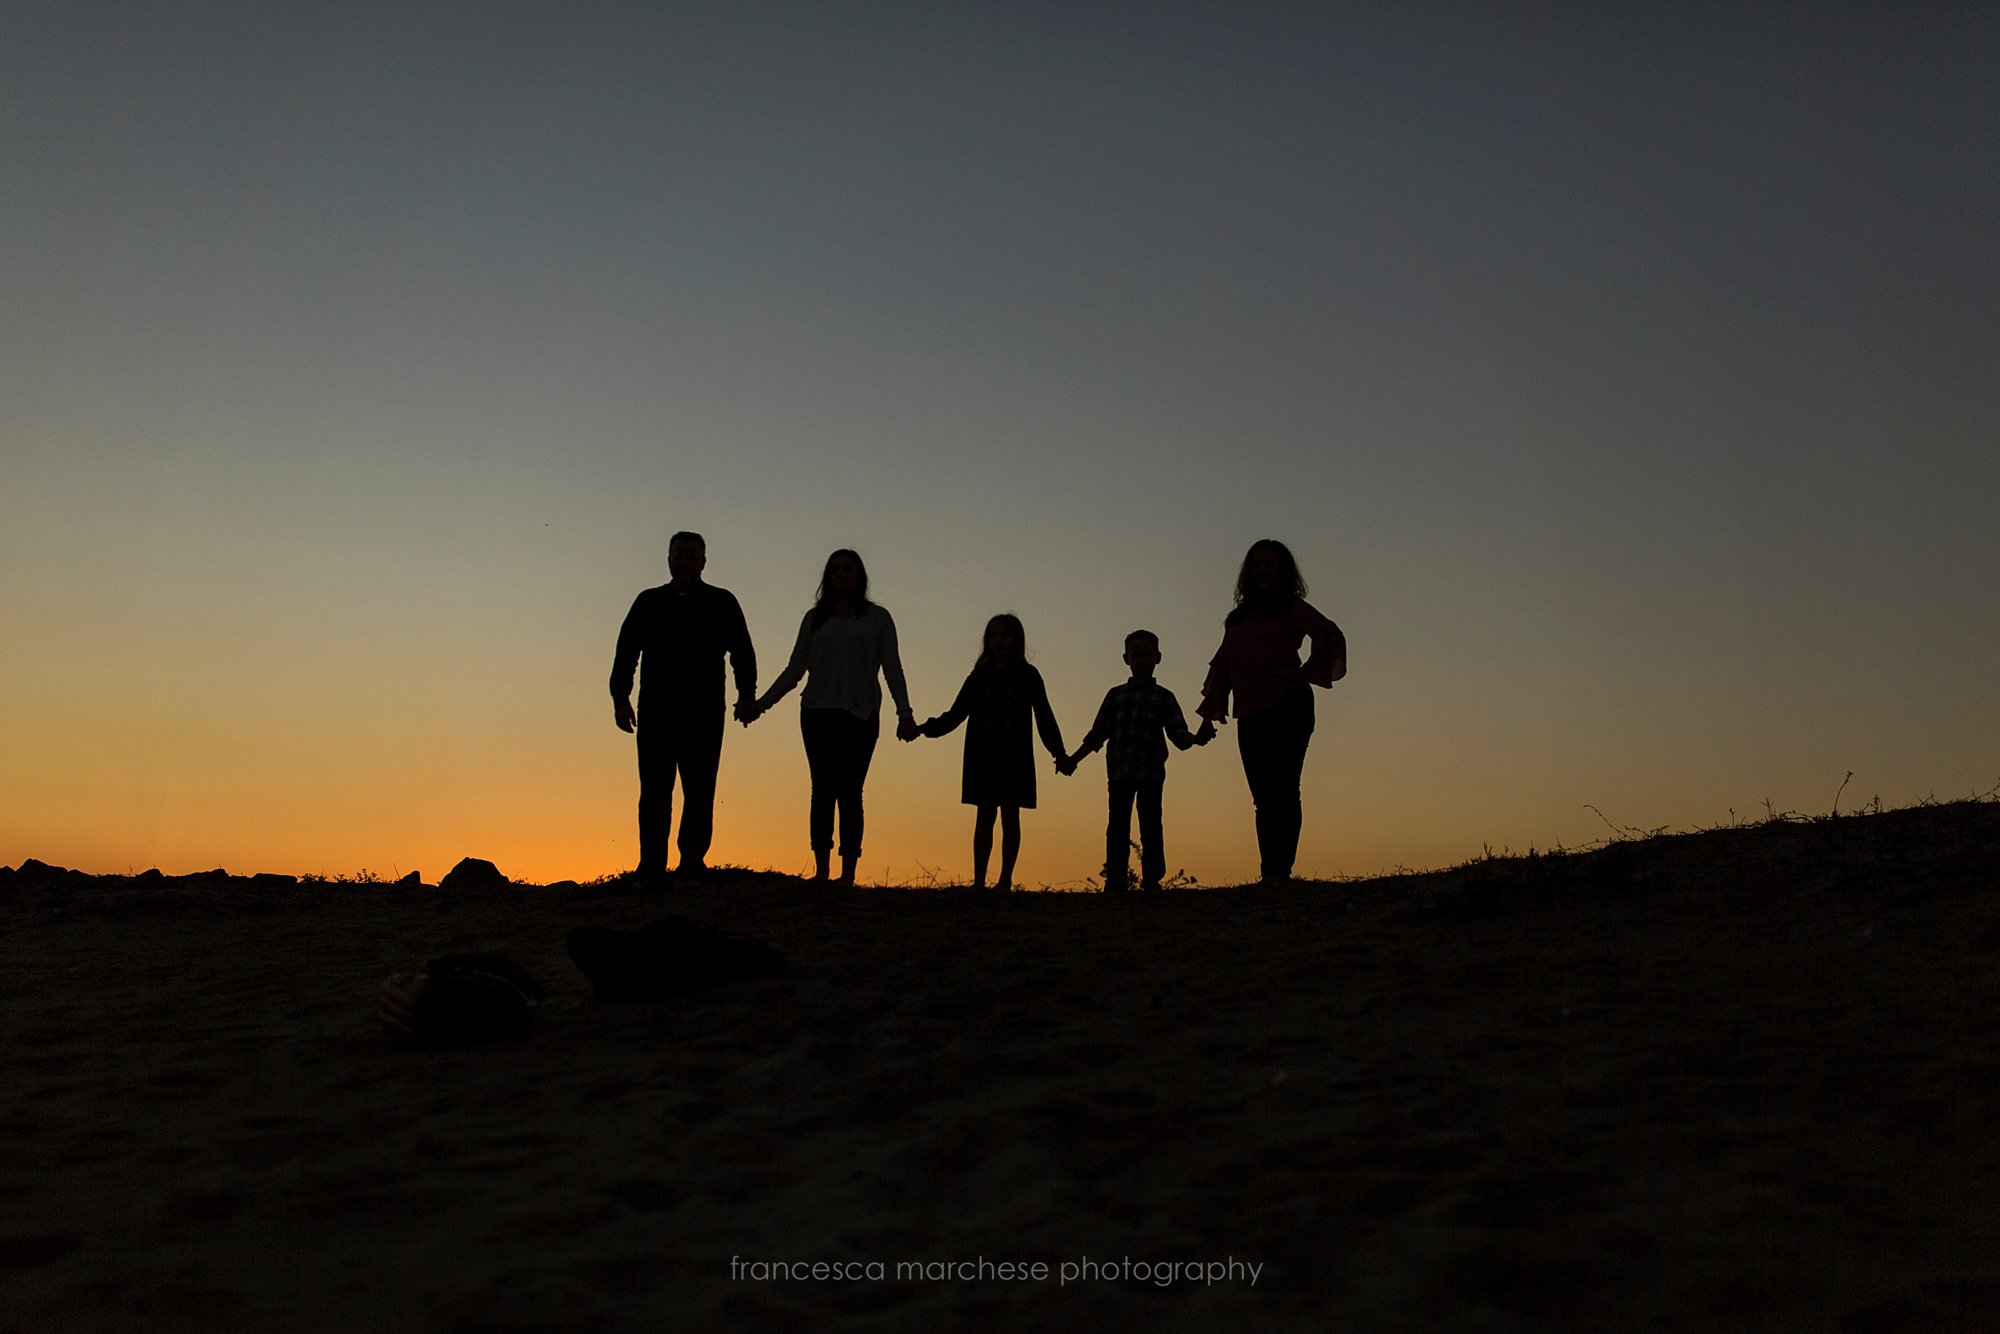 Francesca Marchese Photography Orange County Long Beach Southern california family photographer family of 5 with older children silhouette